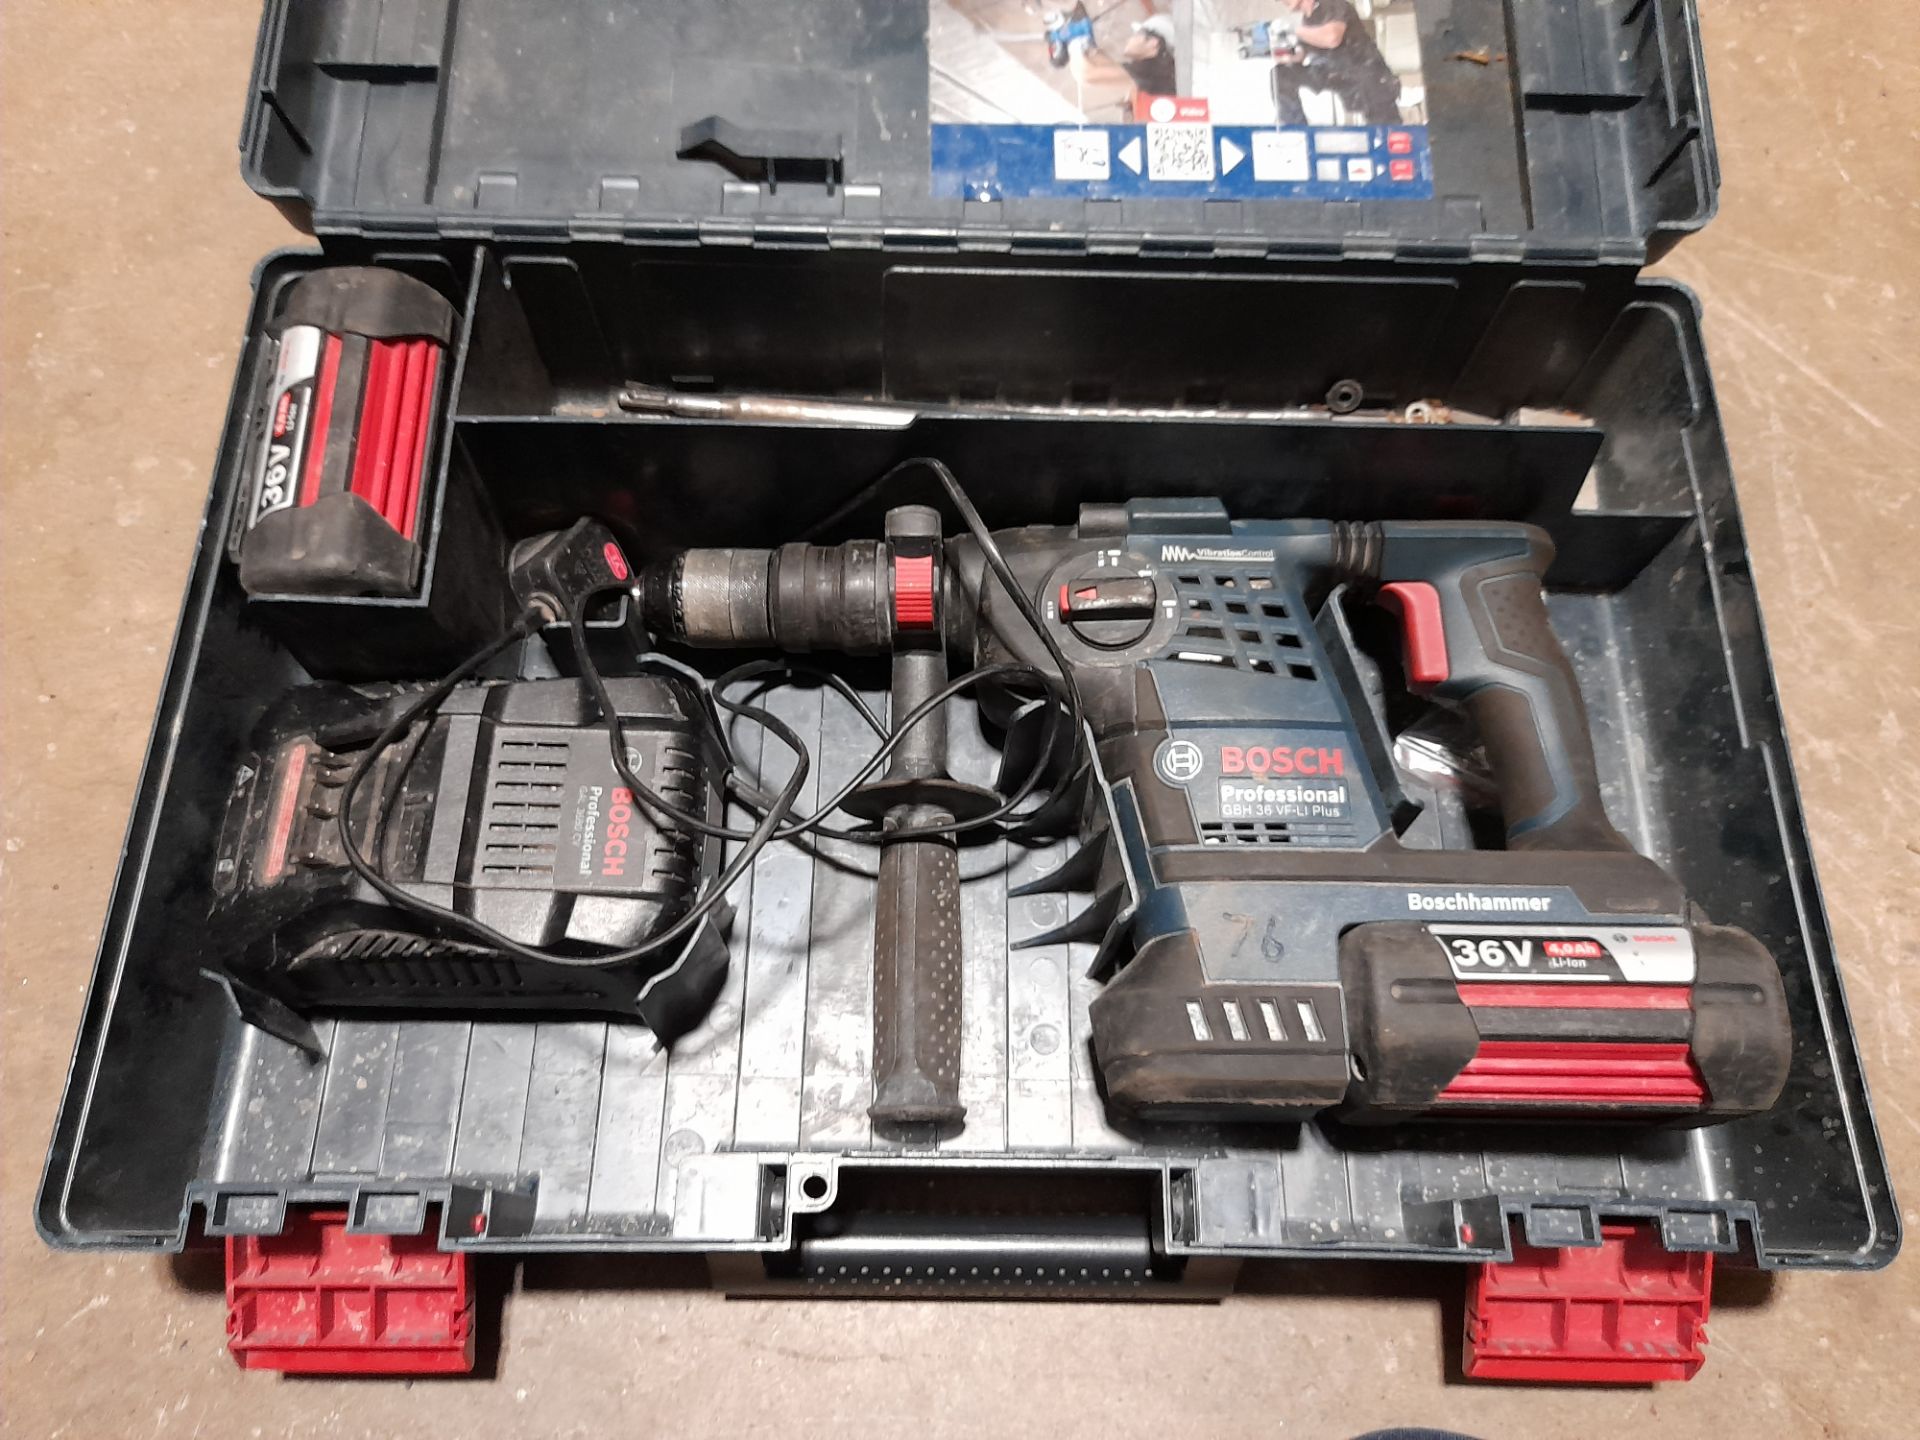 Bosch Professional GBH 36 VF-LT Plus hammer drill, to case, including spare battery and charger - Image 2 of 4